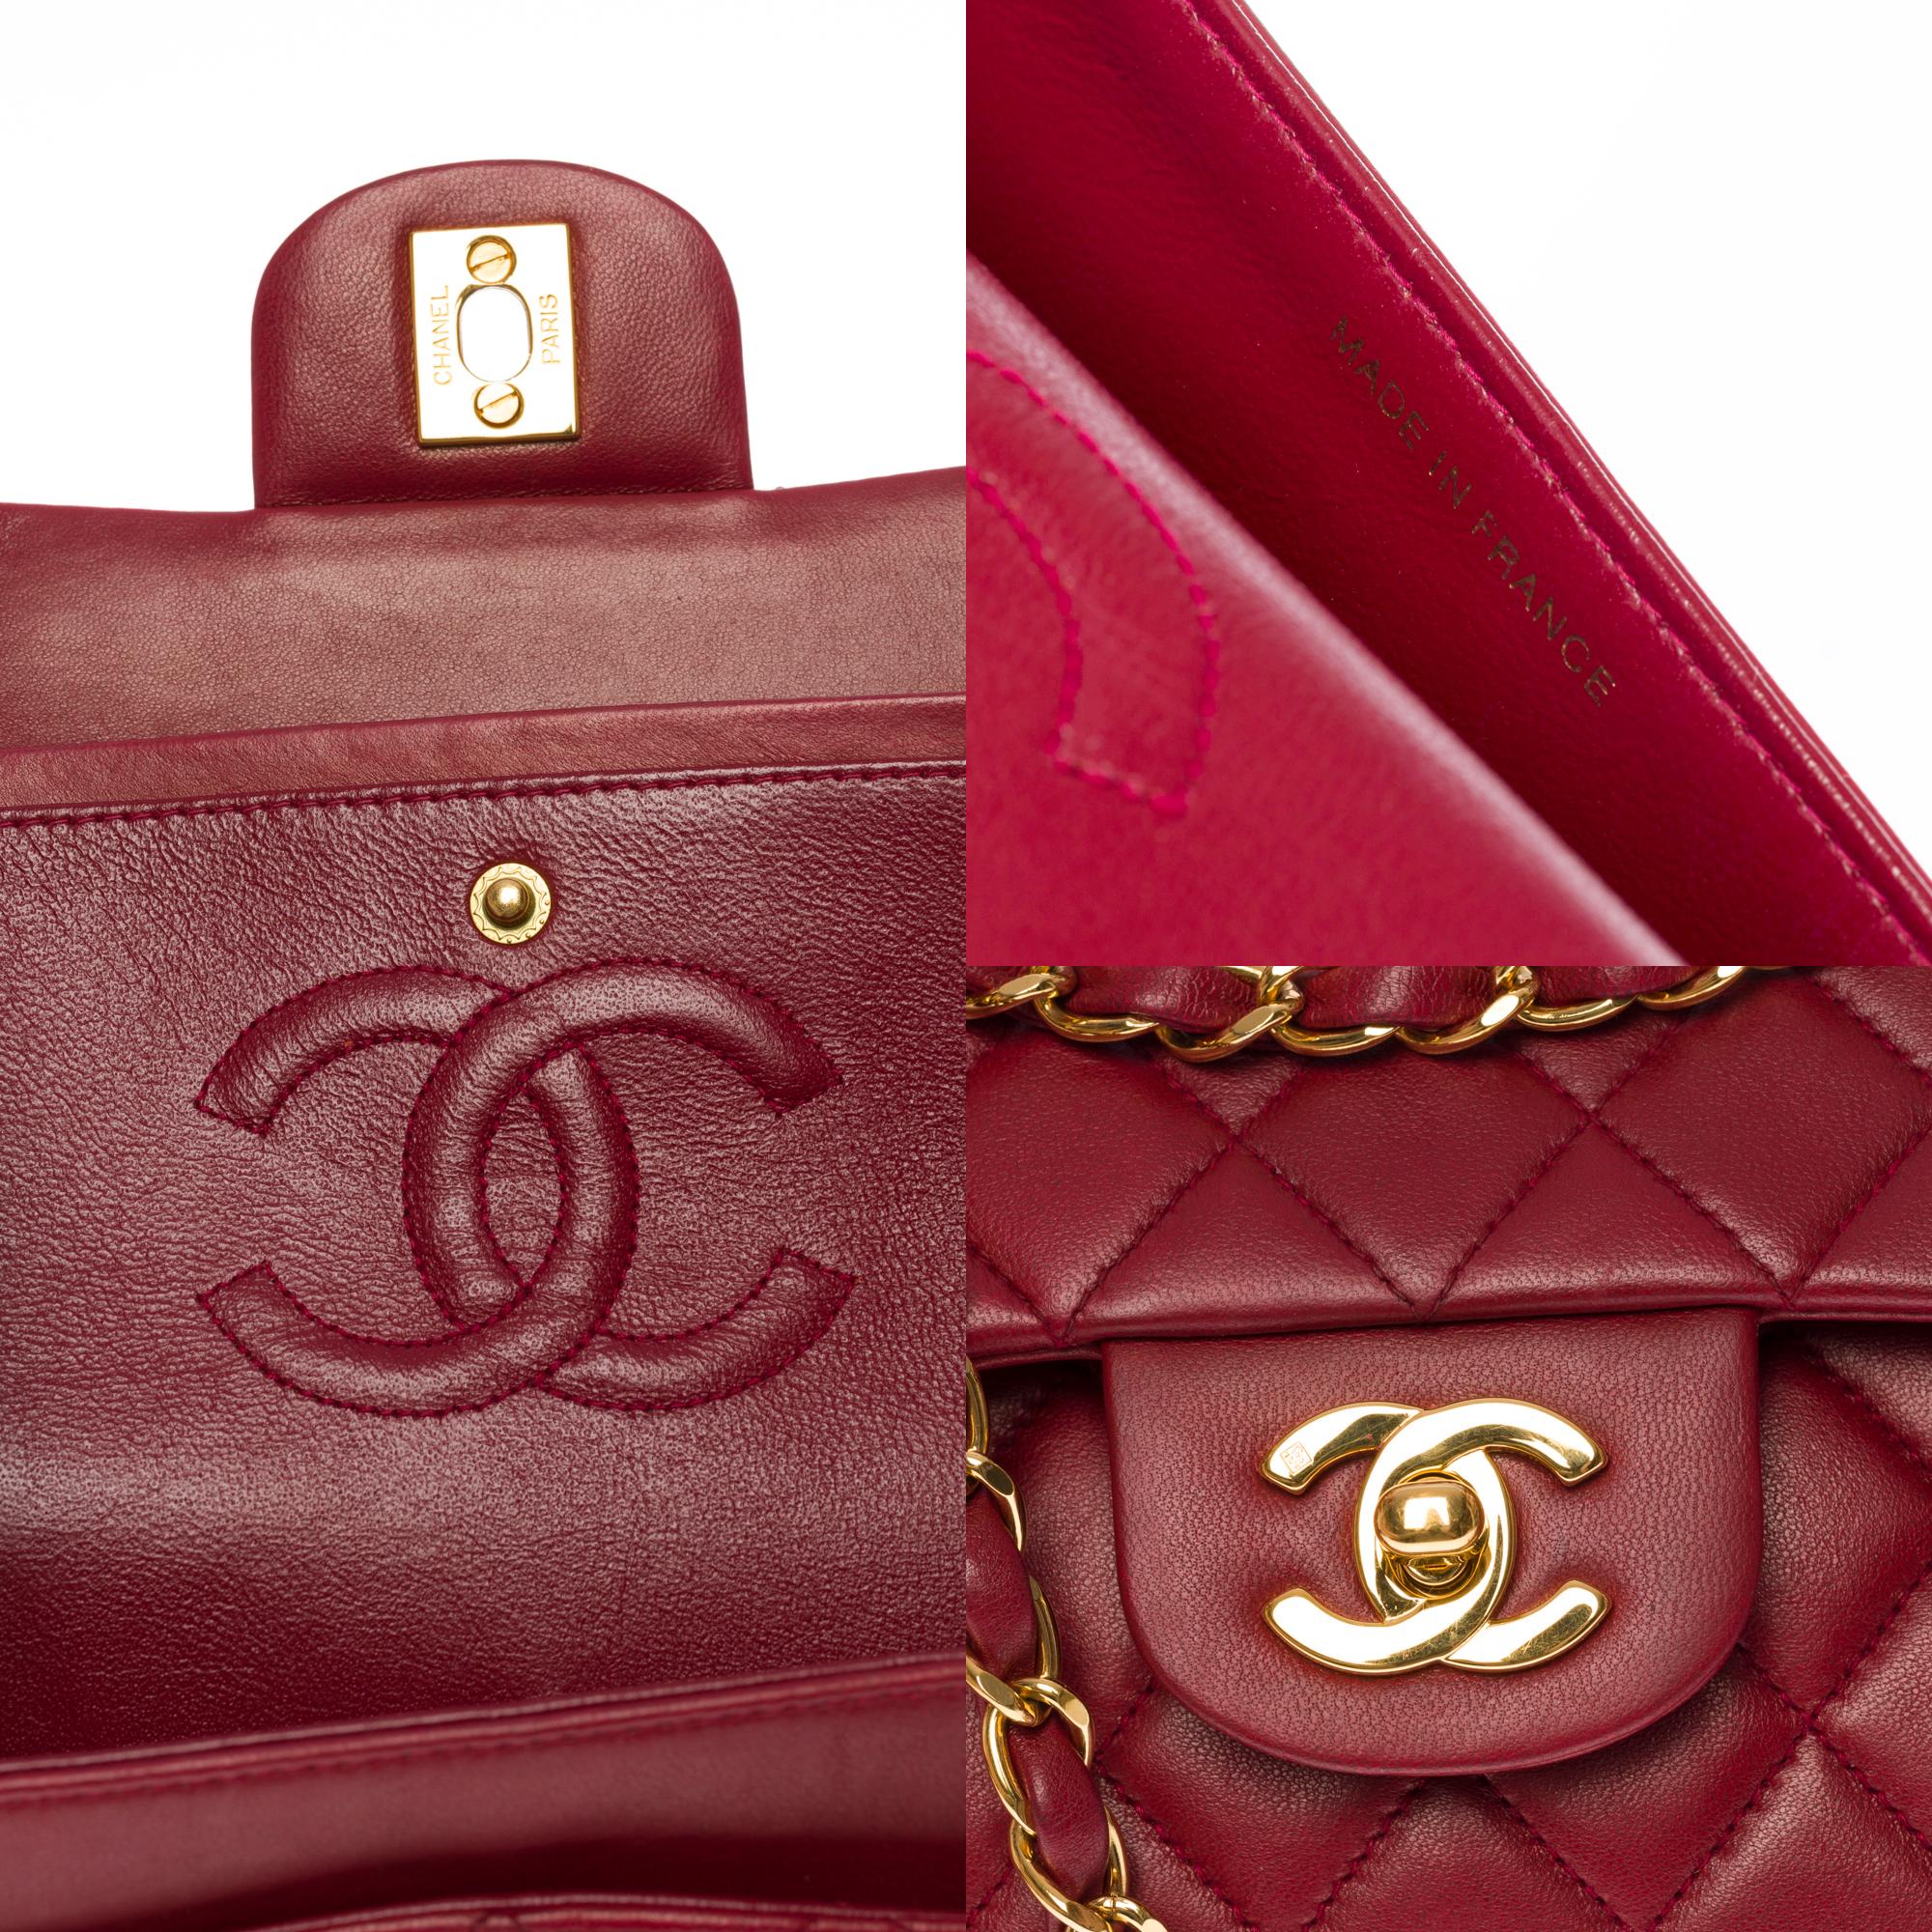 Women's Chanel Timeless 23cm double flap Shoulder bag in red quilted lambskin, GHW